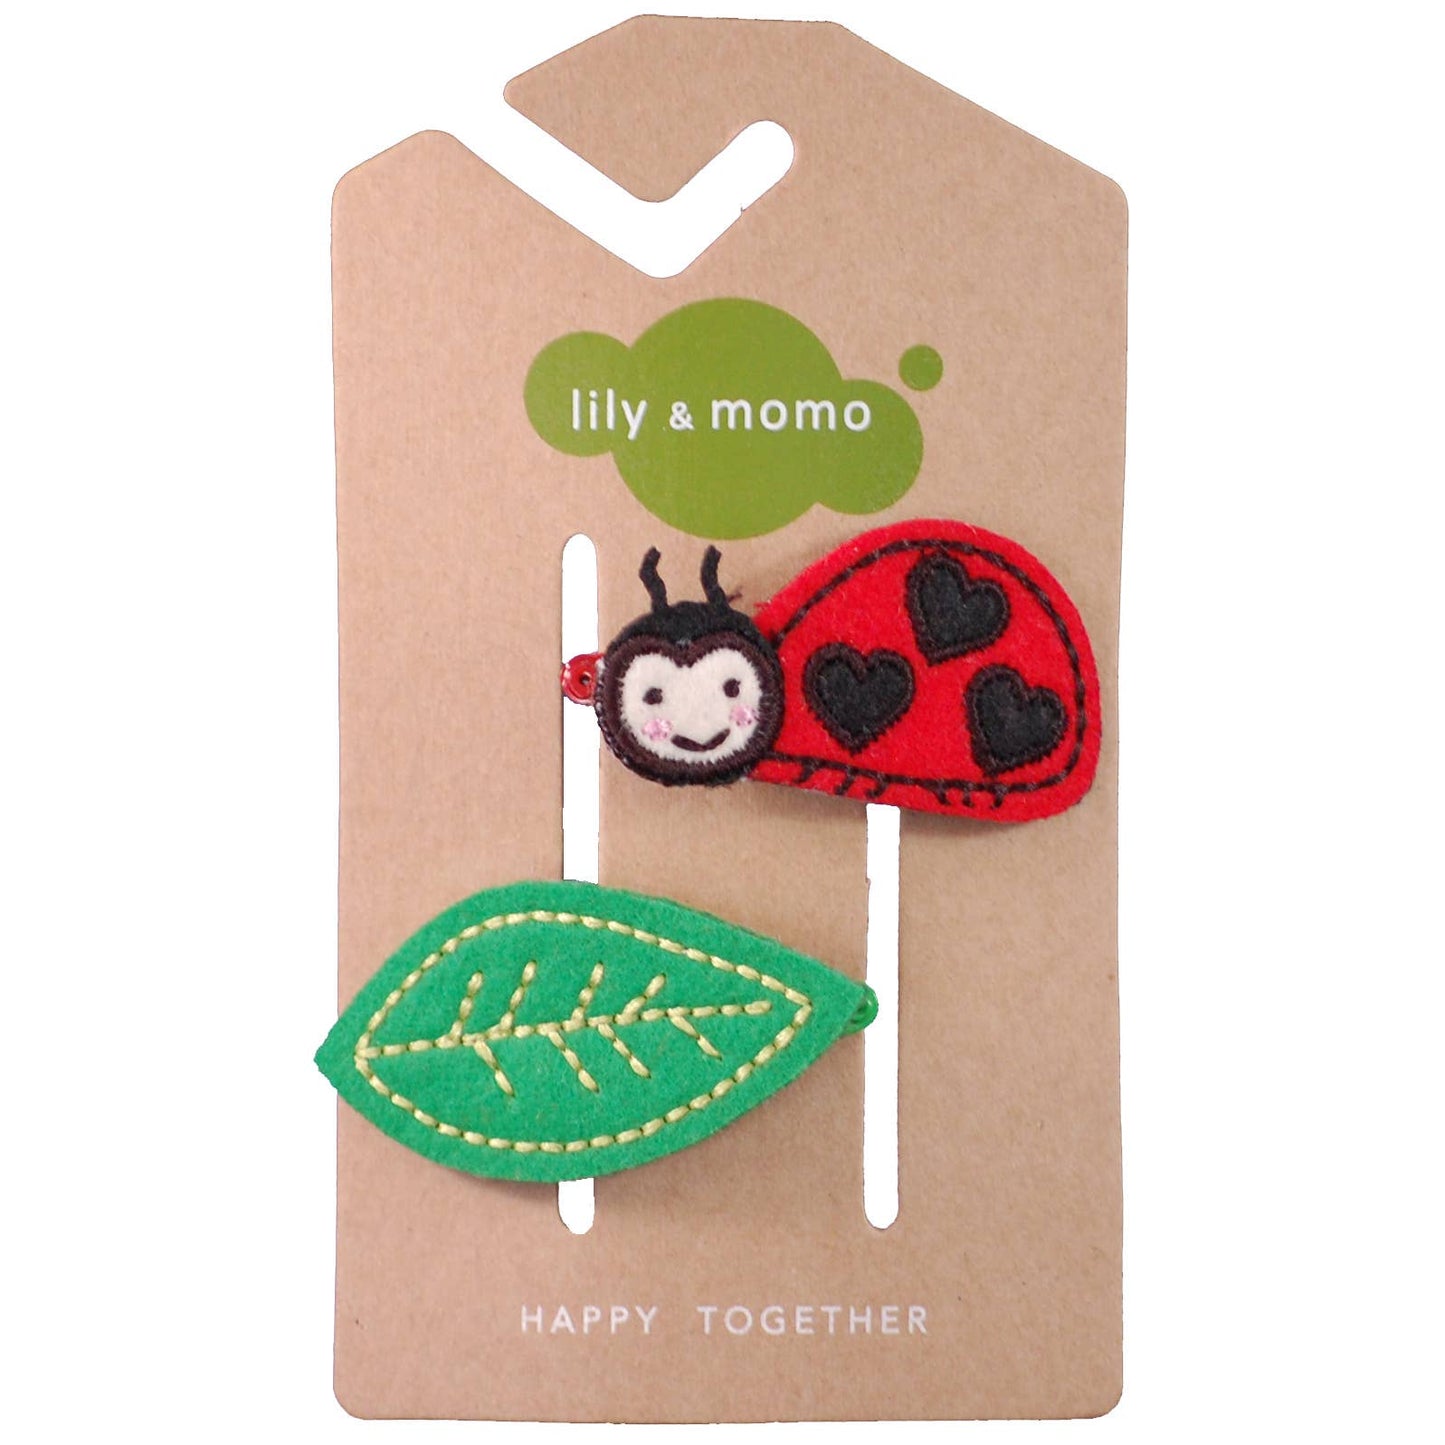 Lily and Momo - Ladybug Hair Clips- Red and black